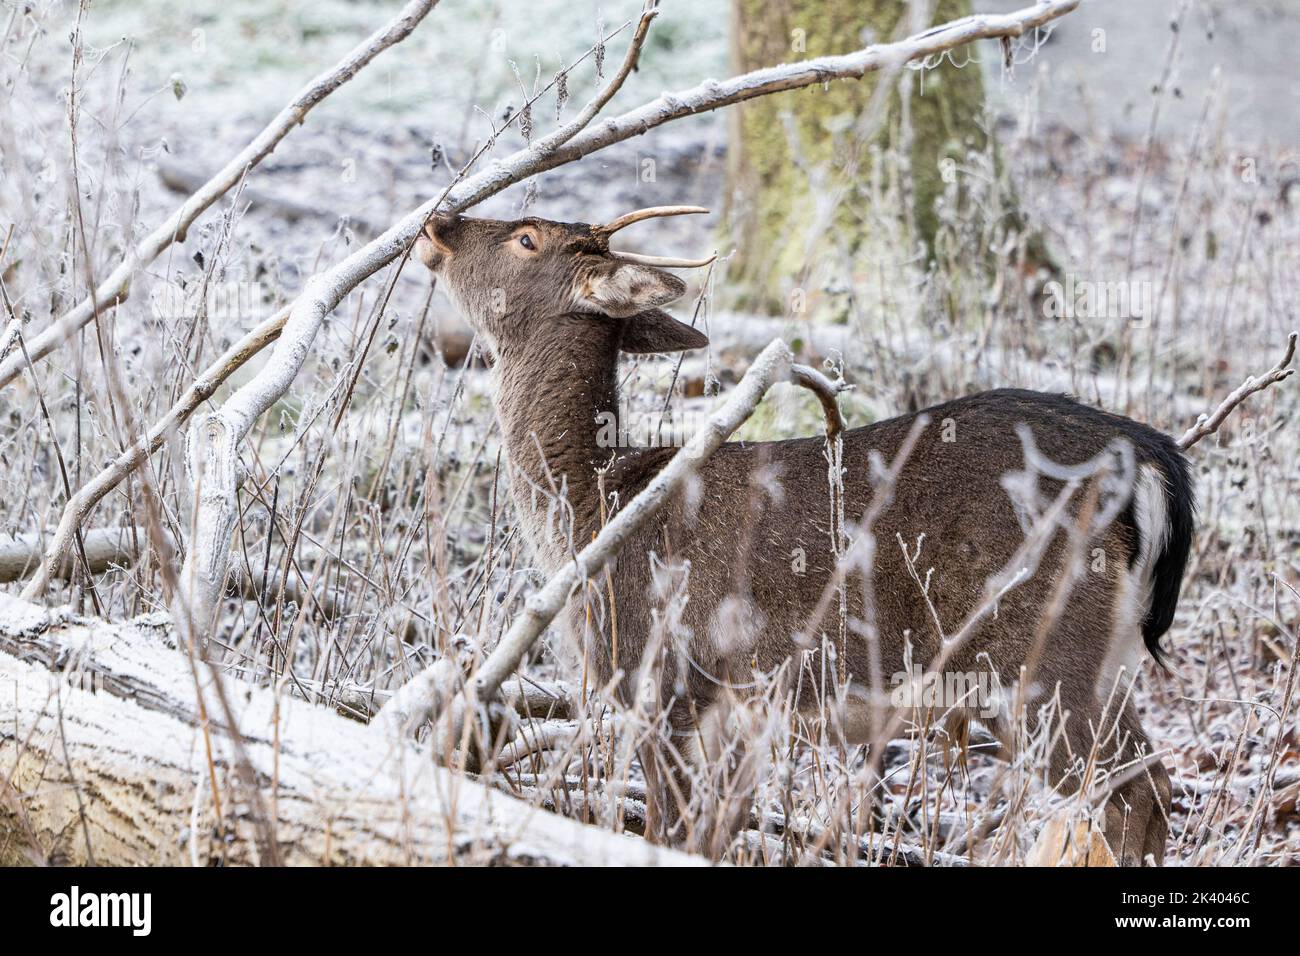 brown deer in the forest licks a branch covered with hoarfrost Stock Photo